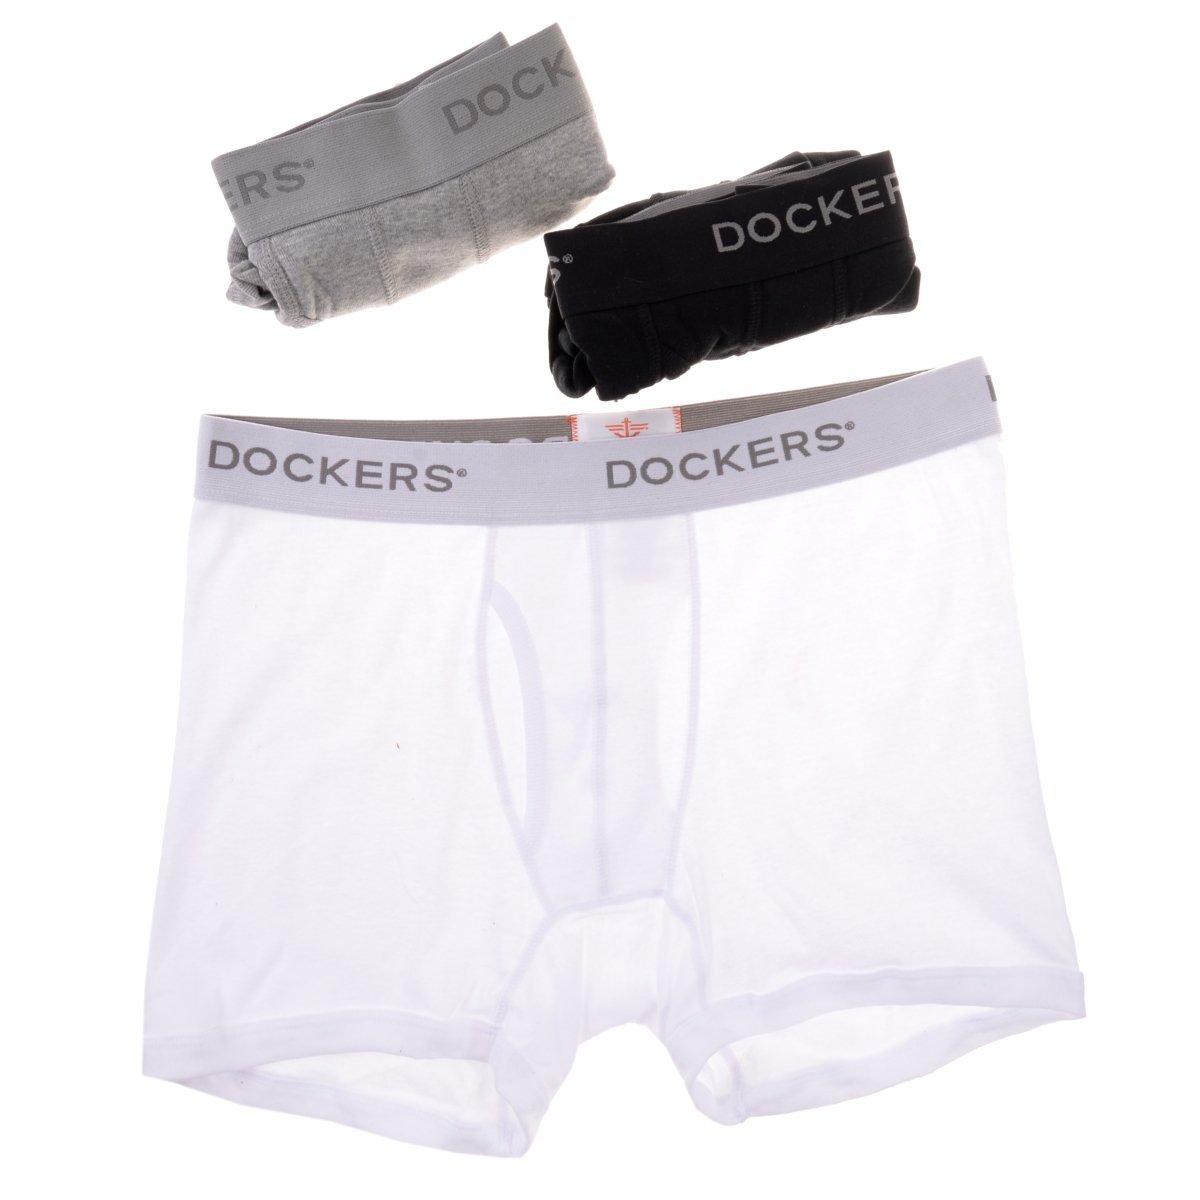 Boxer Brief 3 Pack Dockers